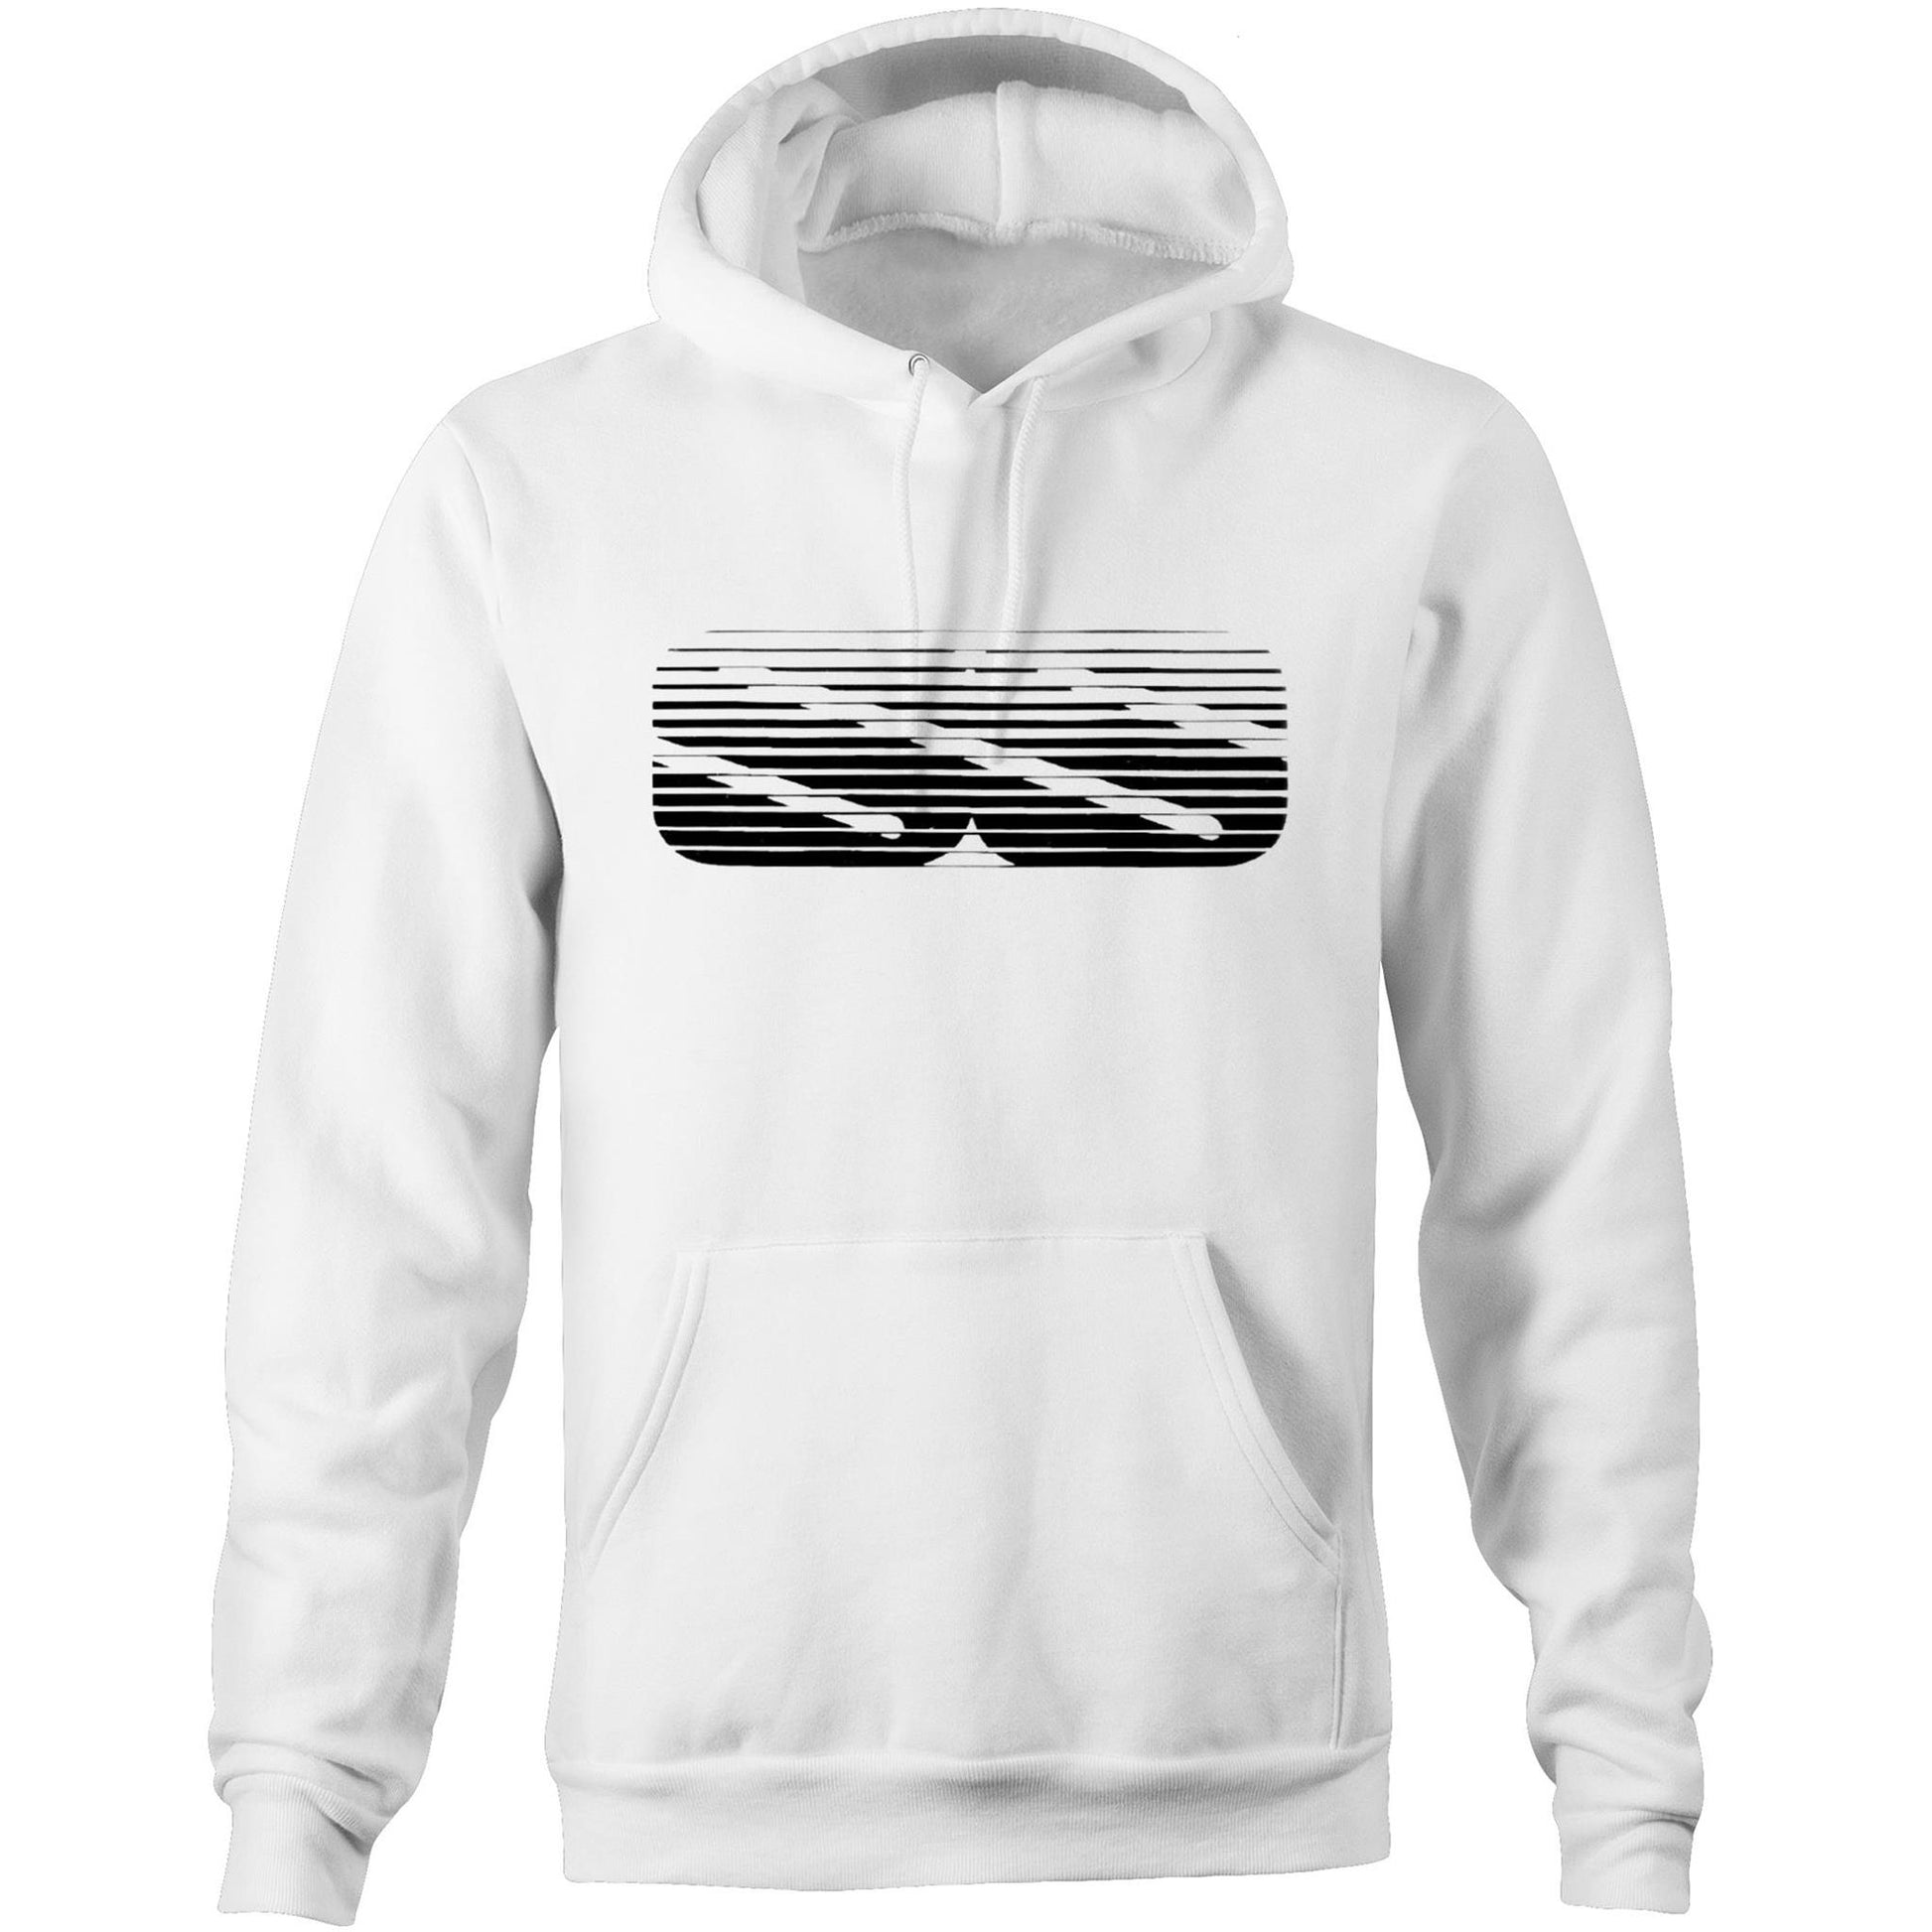 Holden Commodore VK SS Decal - Pocket Hoodie Jumper - Shed Shirts